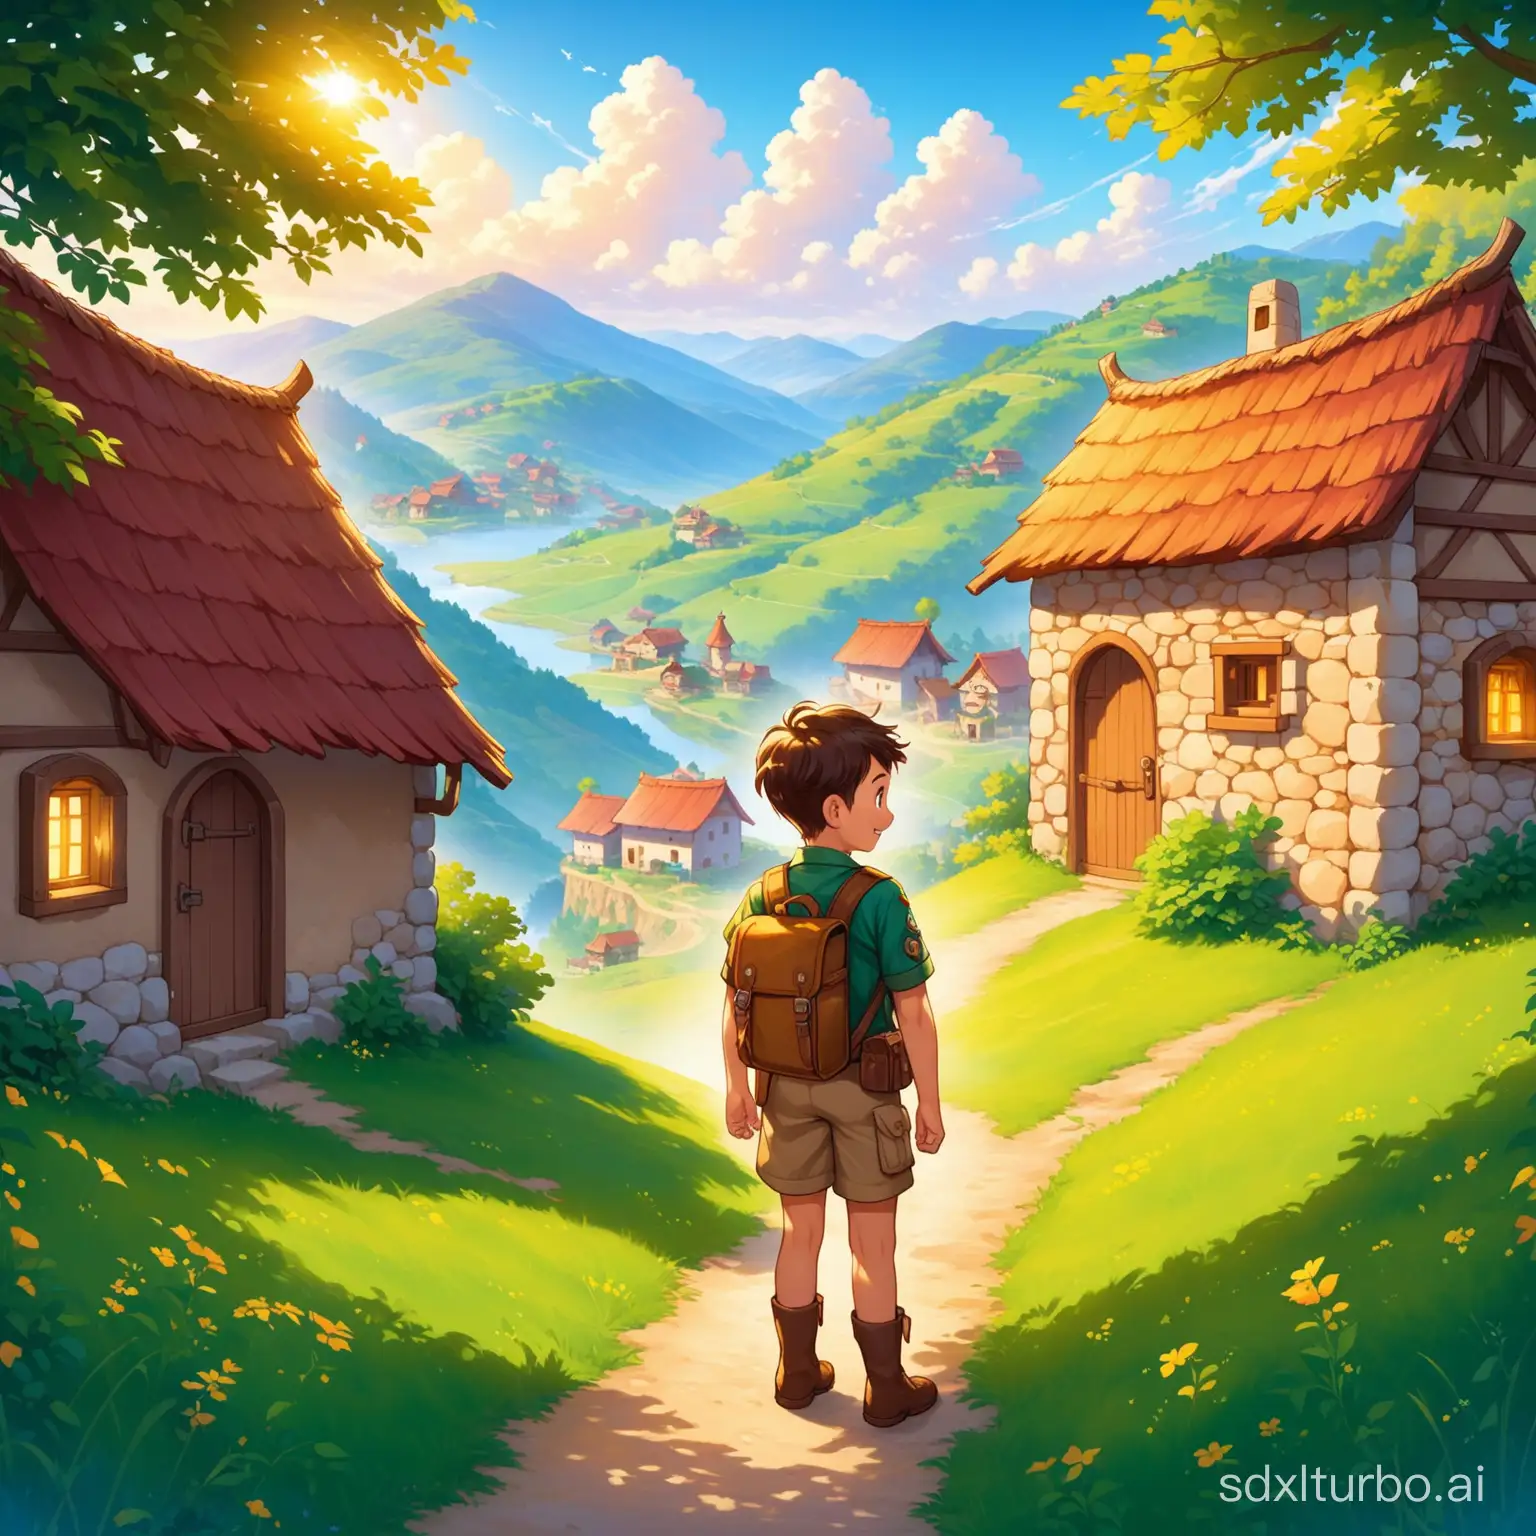 Brave-Boy-Explorer-Lucas-Dreaming-of-Legendary-Adventures-in-a-Small-Village